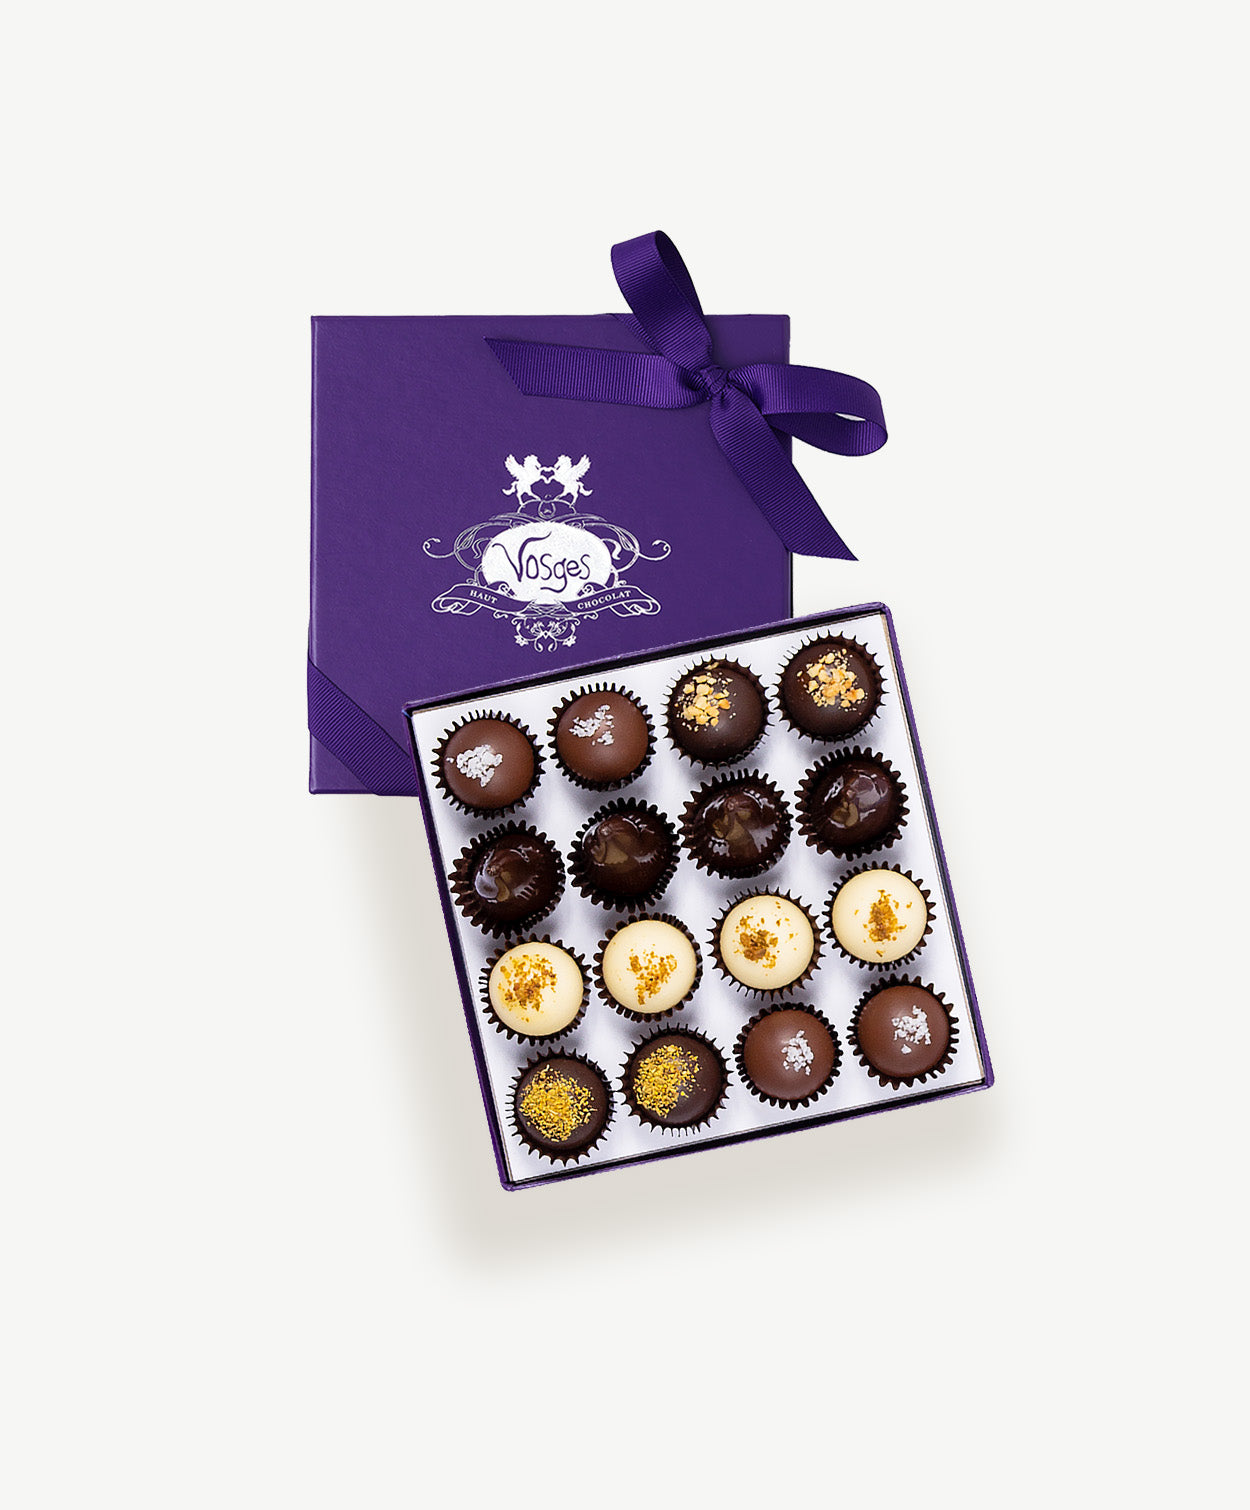 Purple chocolate box embossed with silver foil sits open displaying a Voges Italian Truffle collection with sixteen dark, milk and white chocolate bonbons on a grey background.  